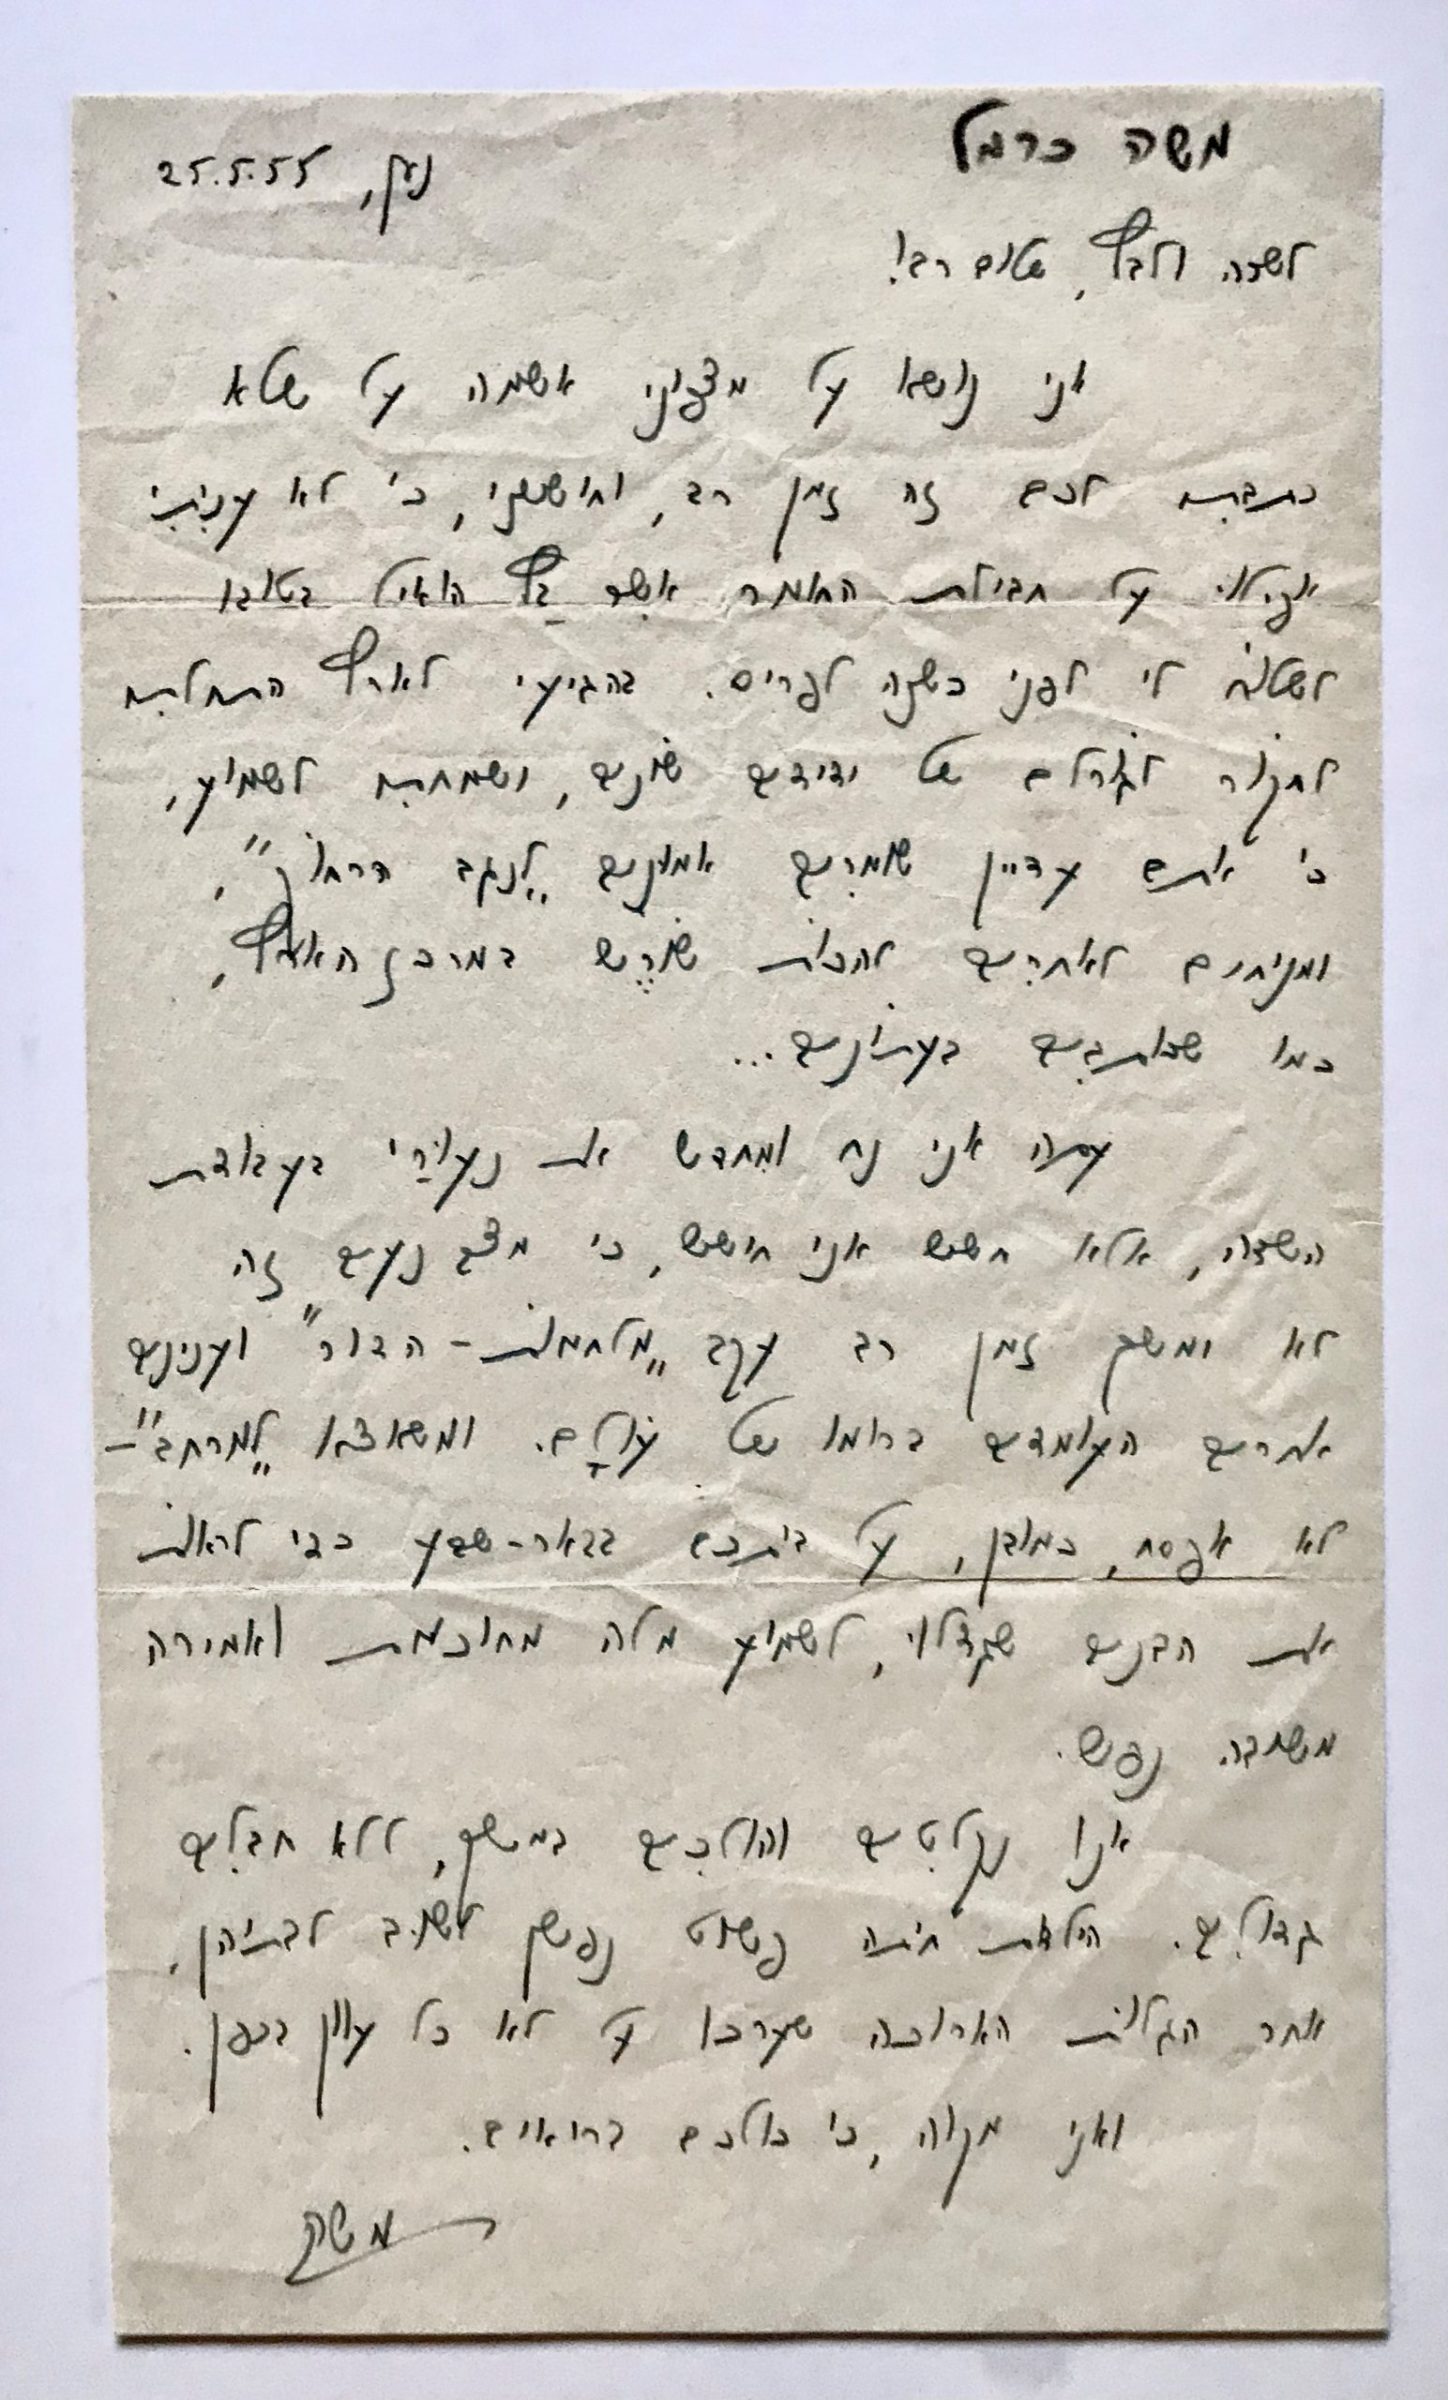 IDF Commander Moshe Carmel Writes Prior to the 1956 Arab-Israeli War: “I am afraid that this pleasant situation will not last long due to the ‘wars of the generation’ and other matters that stand in the world”